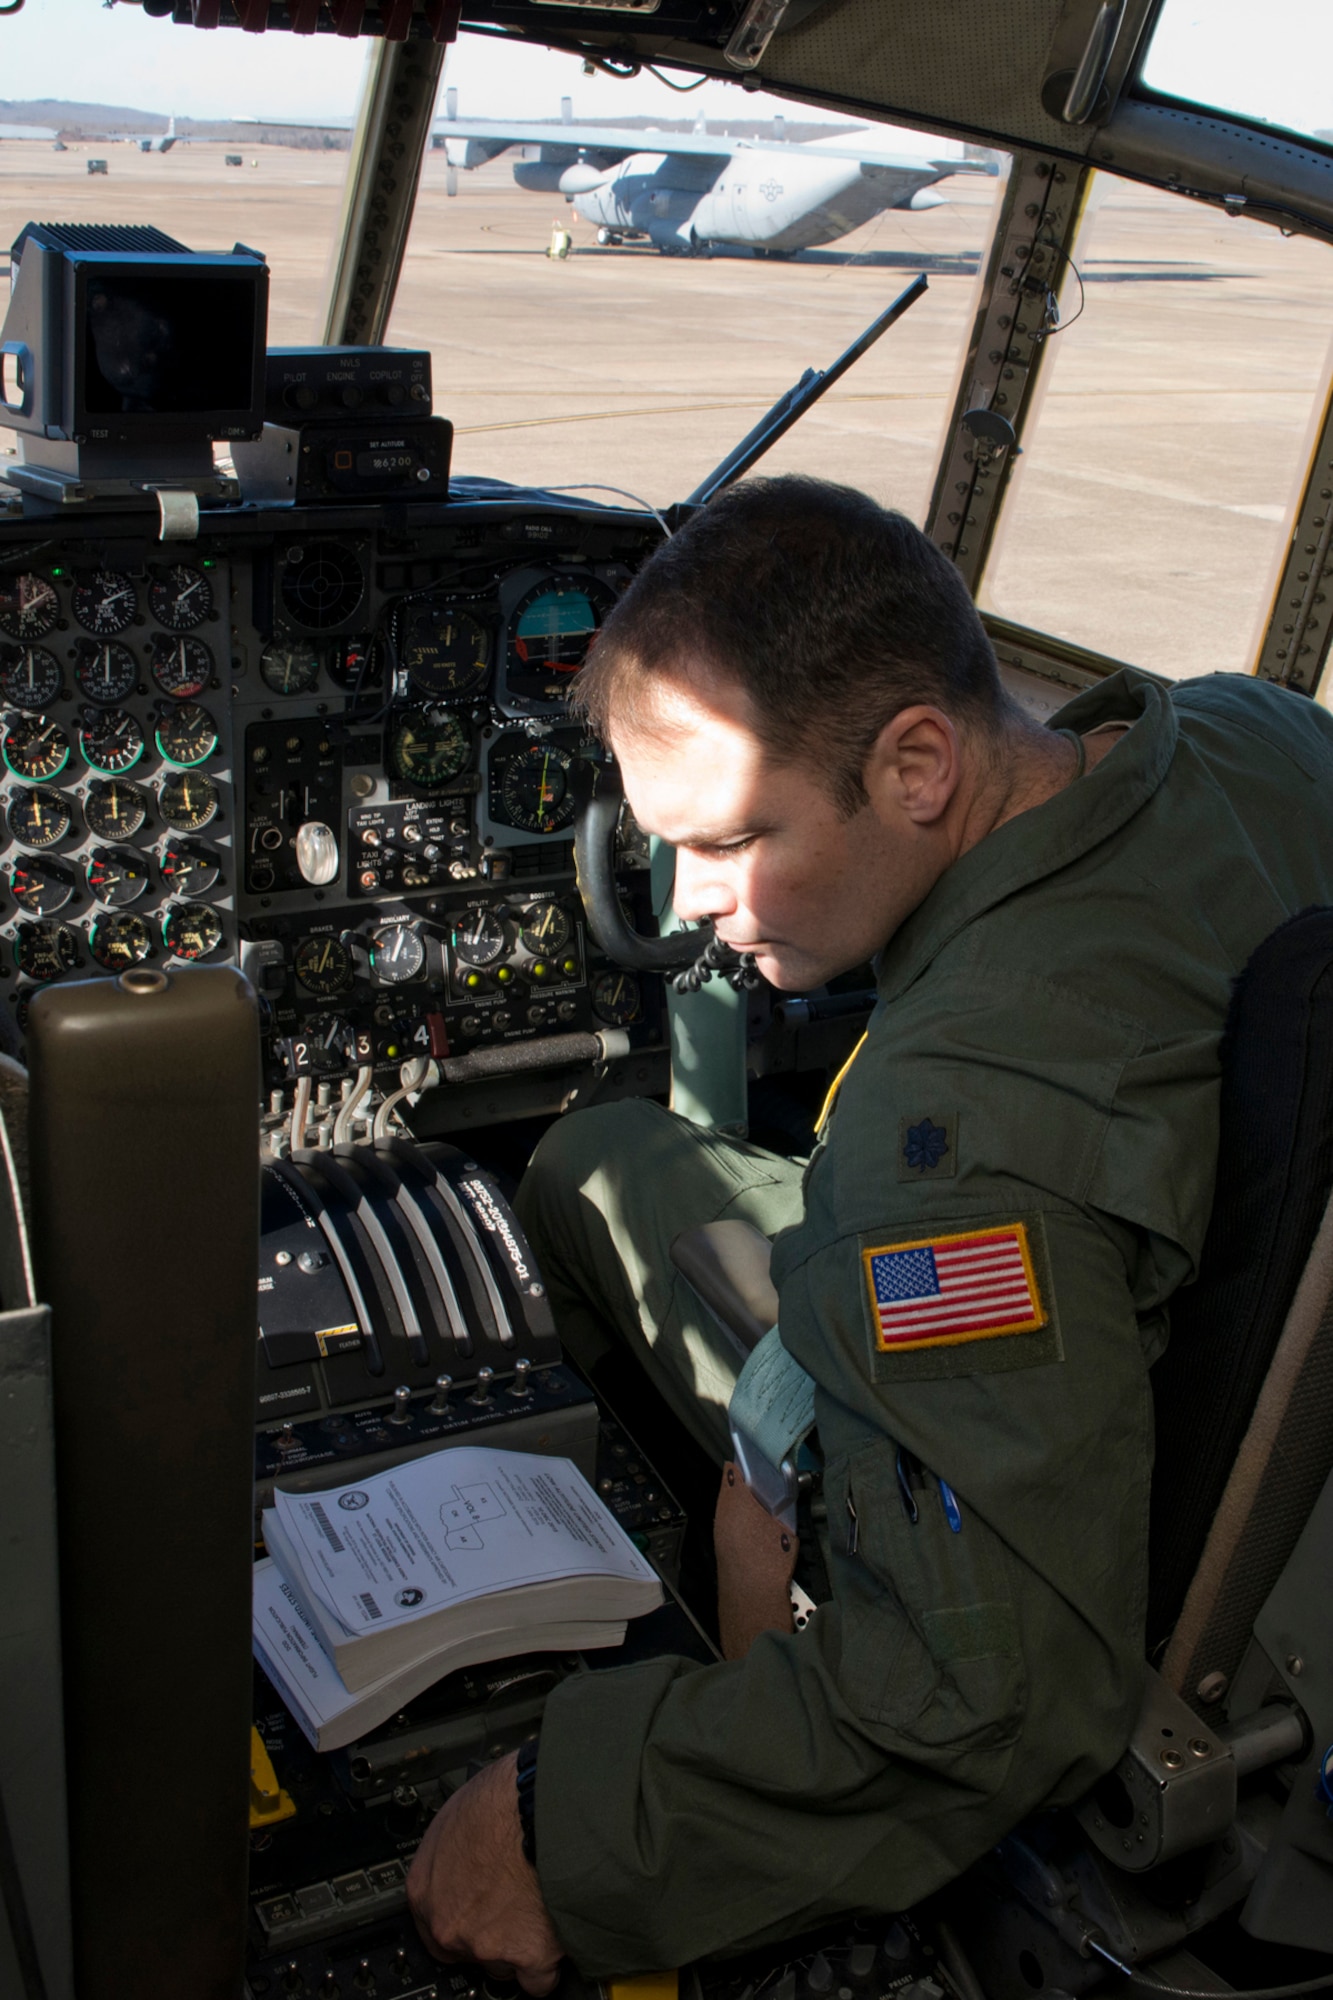 U.S. Air Force Reserve Lt. Col. Keith Jasmin, chief of current operations, 913th Operations Support Squadron, performs preflight checklist before a training mission at Little Rock Air Force Base, Ark., Jan. 28, 2016. The final two-hour mission consisted of low level air drop techniques and pilot proficiency training. (U.S. Air Force photo by Master Sgt. Jeff Walston/Released)  